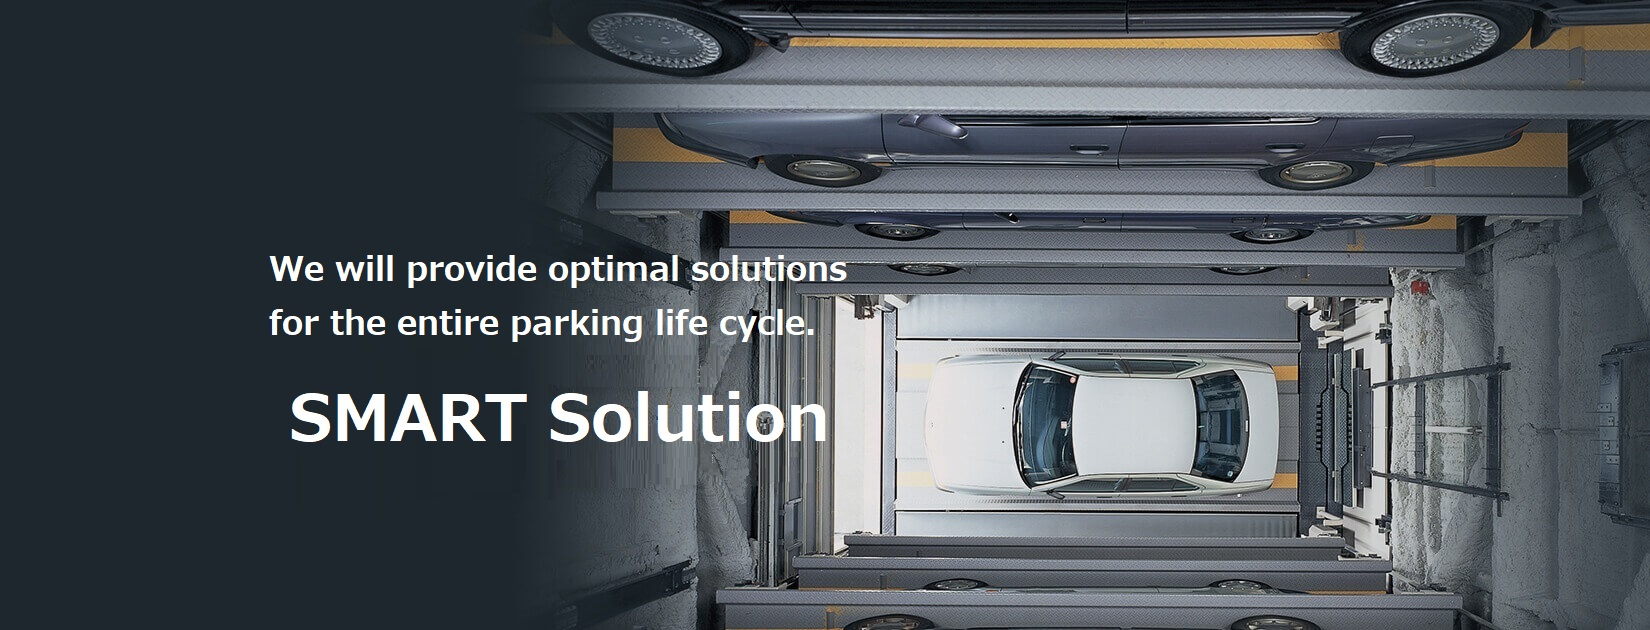 We will provide optimal solutions for the entire parking life cycle. SMART Solution